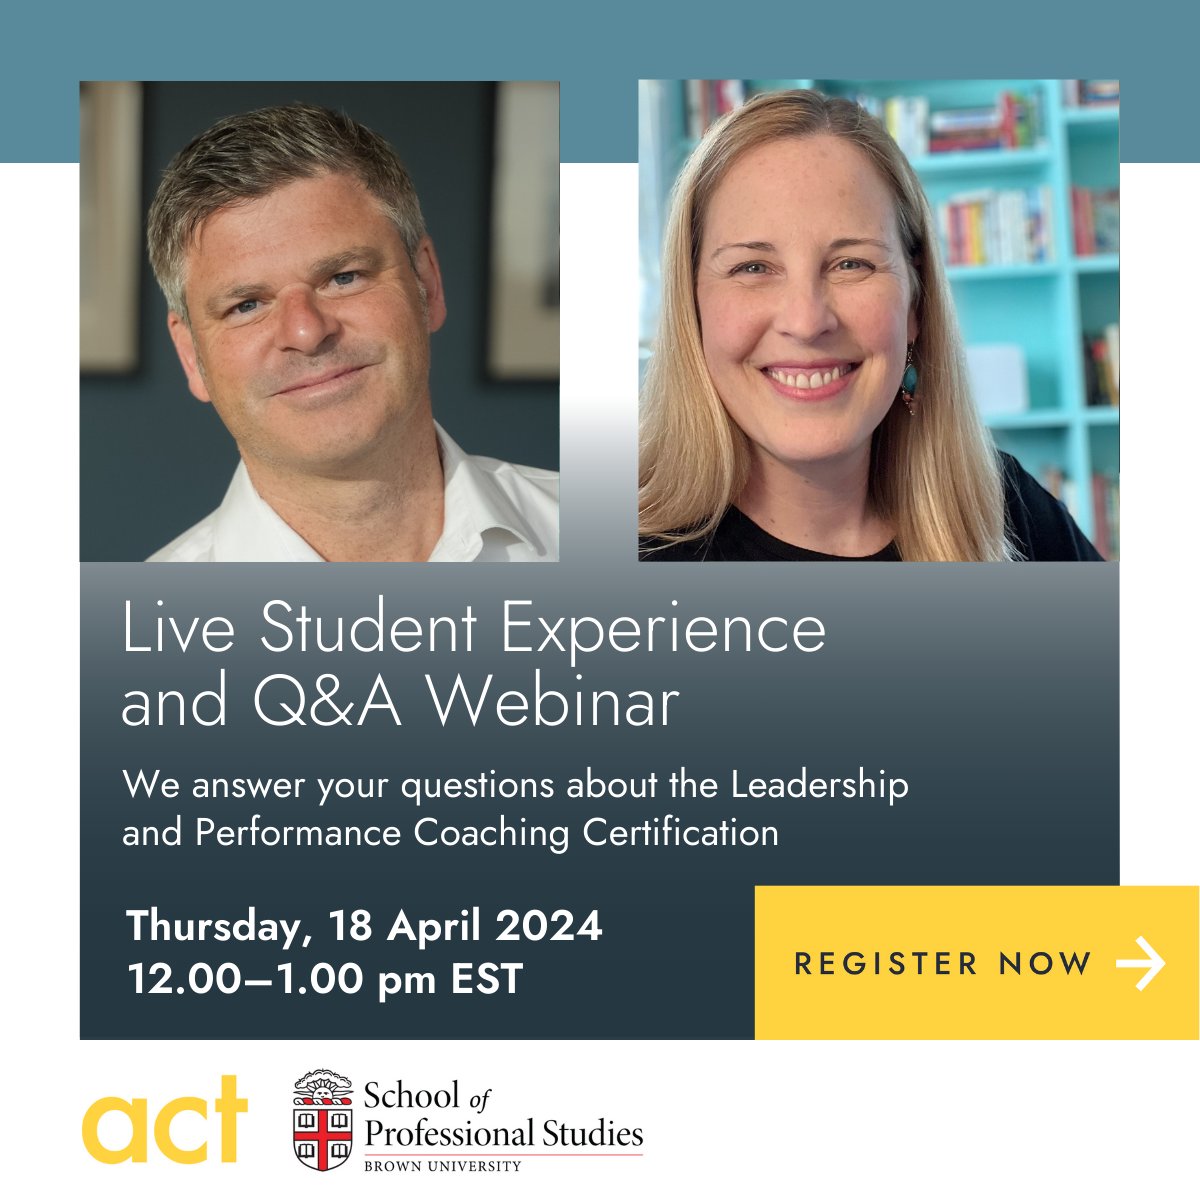 Join us TODAY for a LIVE Student Experience and Q&A Webinar with Karin McGrath Dunn and one of the Co-Founders of ACT Leadership. 
➡️Thursday 18 April 2024, 12.00 EST
➡️ To register click: actleader.com/coaching-certi…

#coaching #leadership #coachingcertification #studentexperience